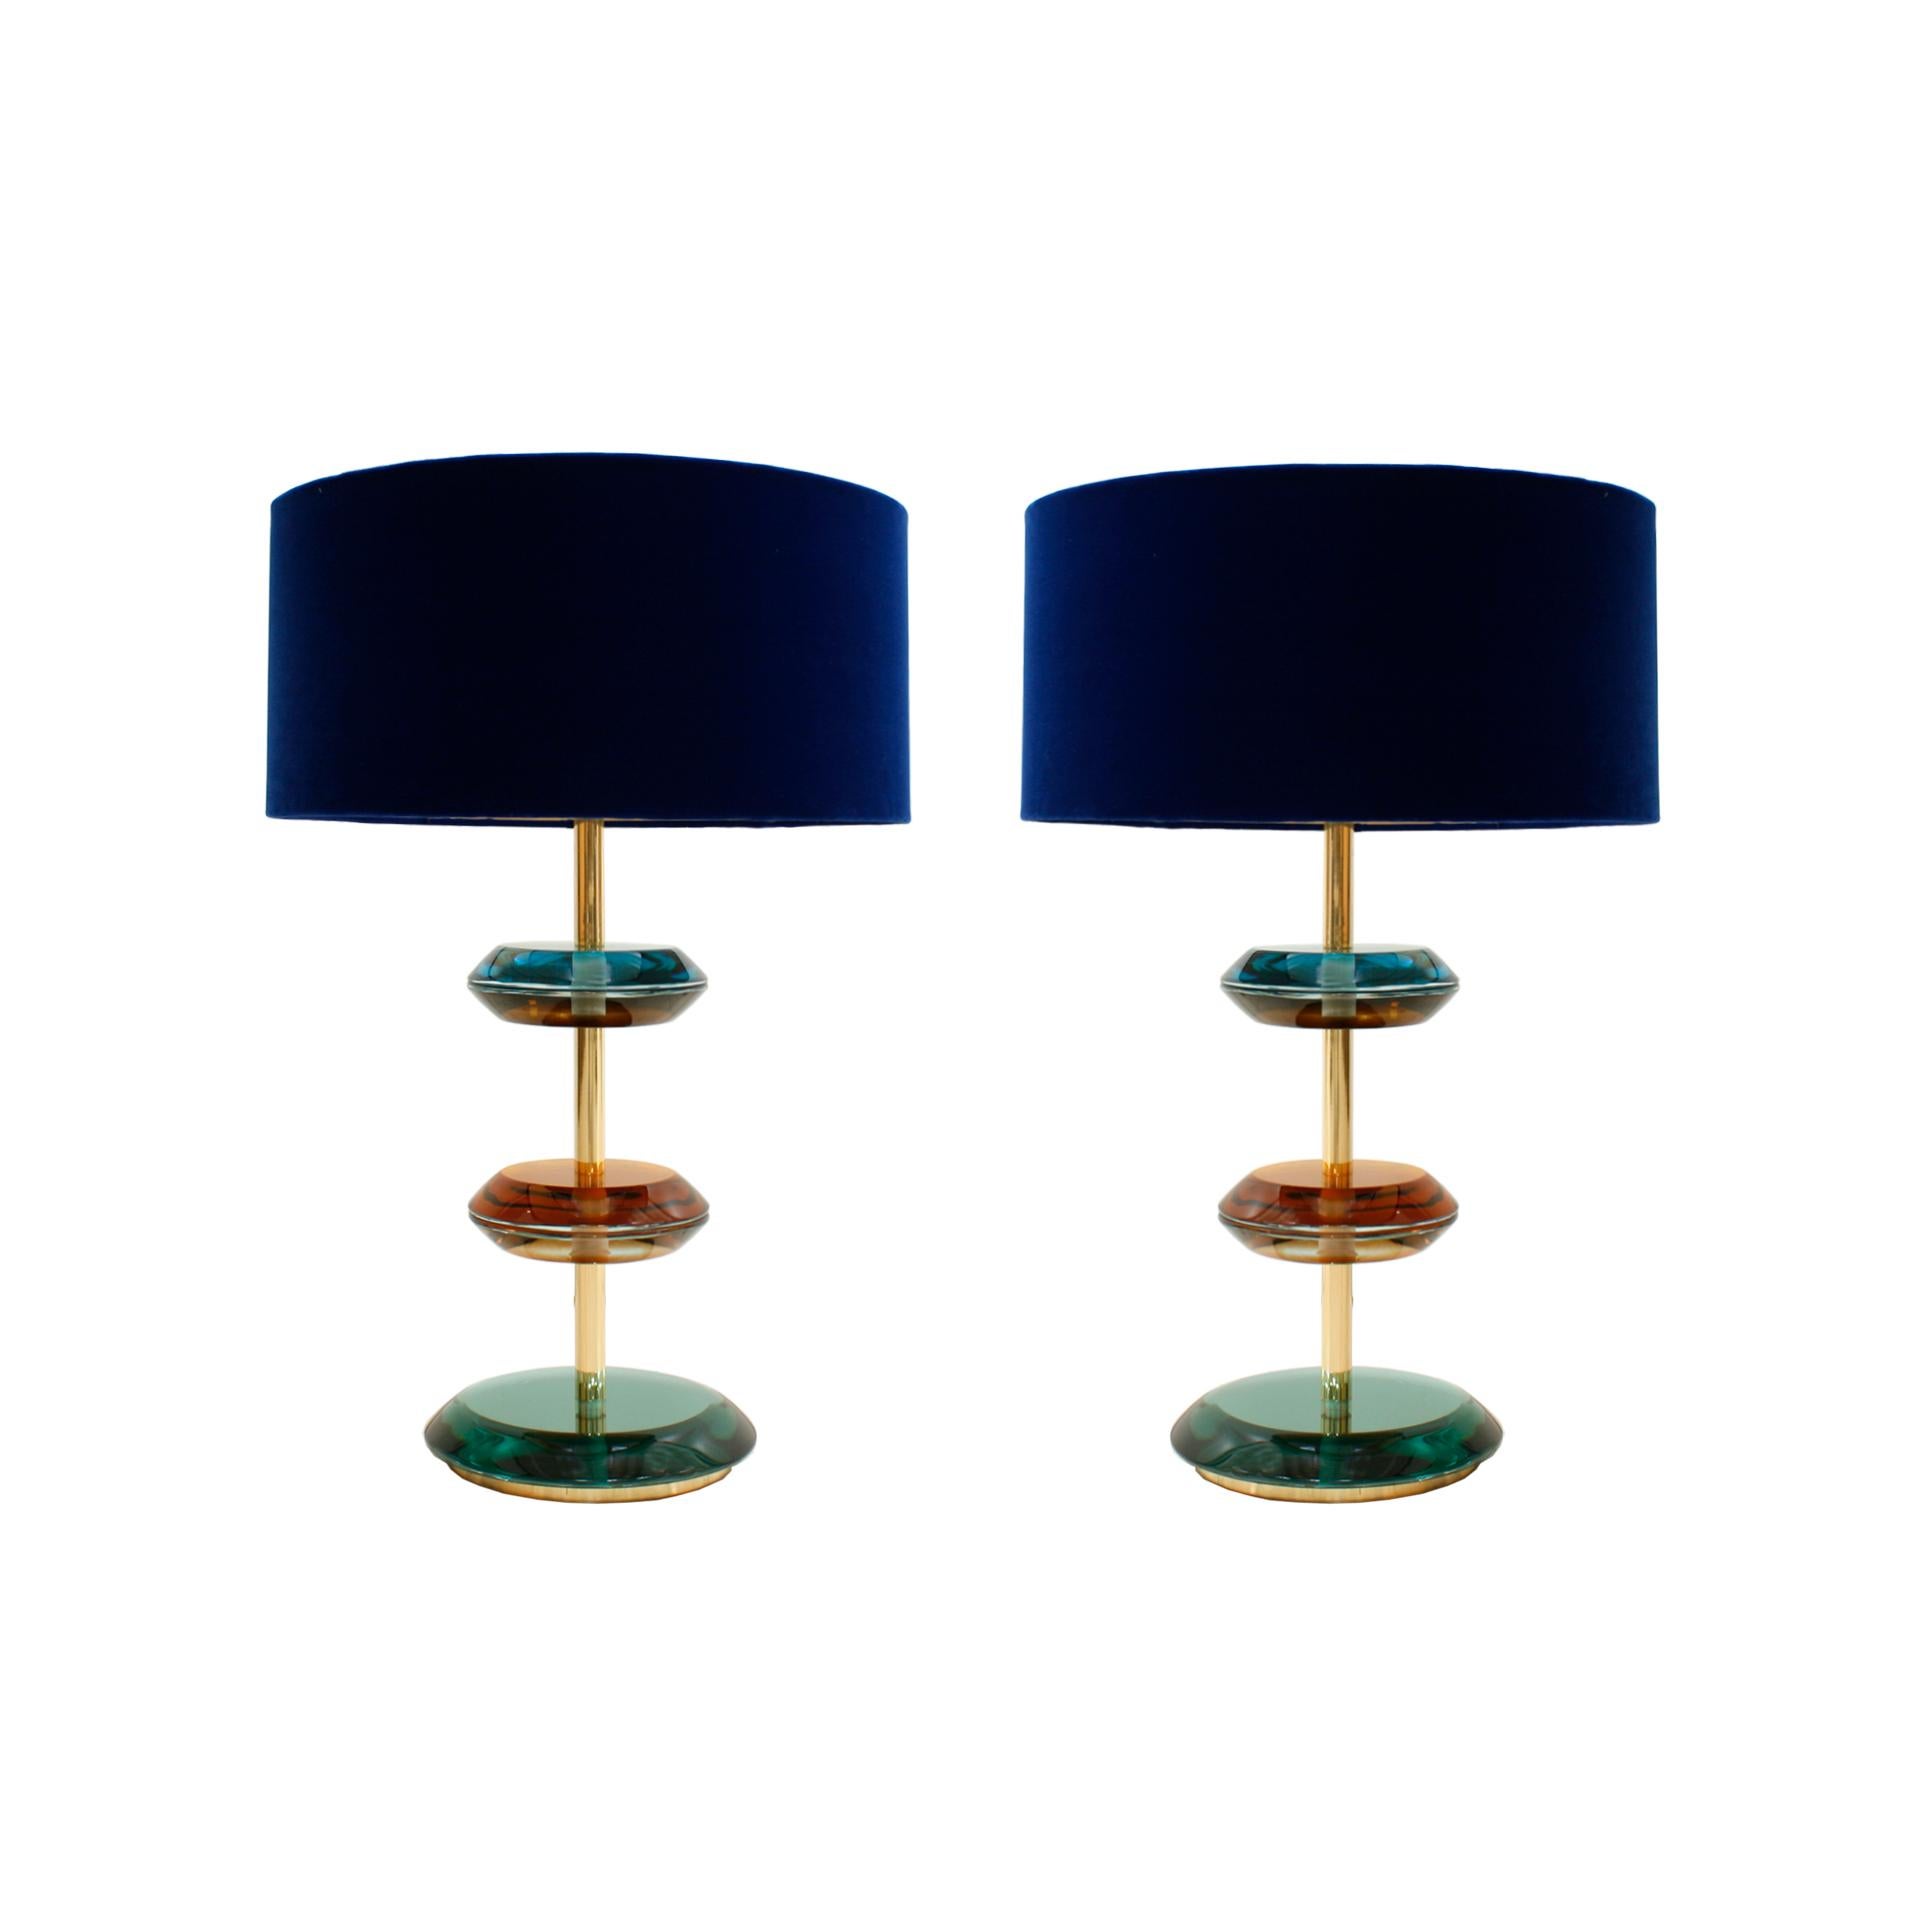 Pair of table lamps designed by L.A. Studio. Structure made of solid brass with Murano colored glass pieces.
Manufactured in Italy. Circular white bouclé wool lampshades.

Dimensions with lampshades: Diameter 55 x height 70 cm
Dimensions of the